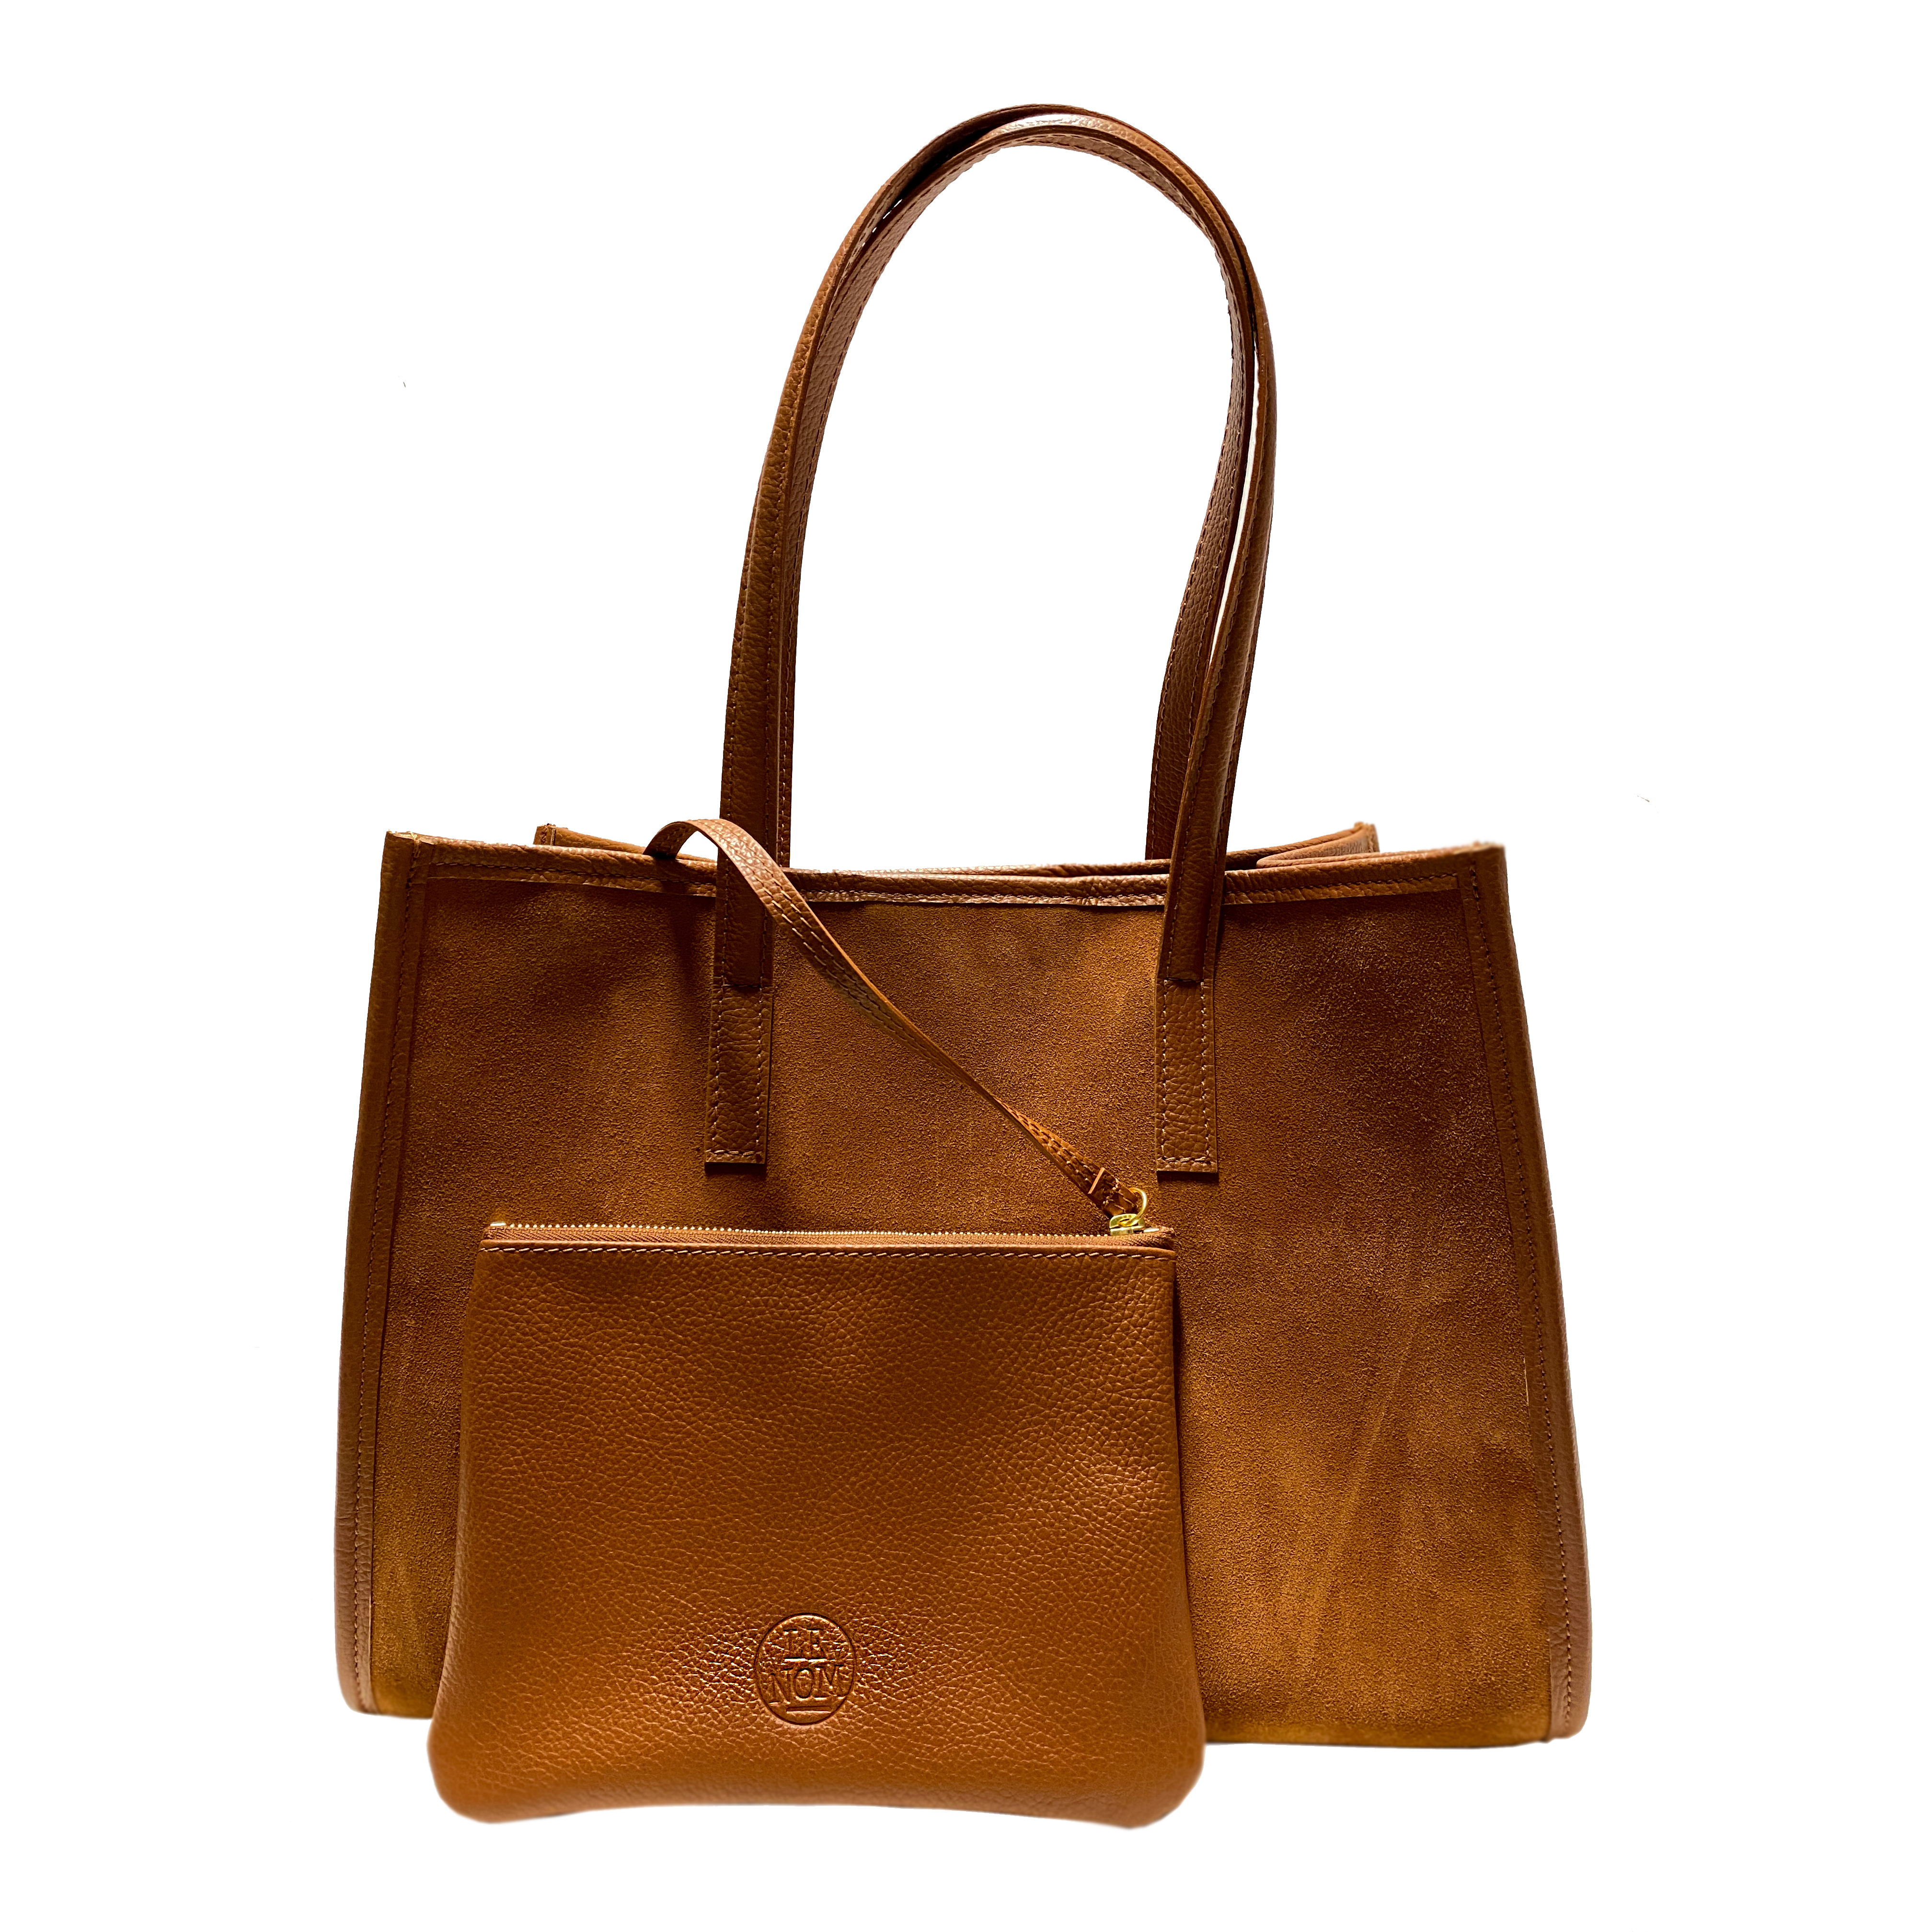 Camille camel suede, camel leather